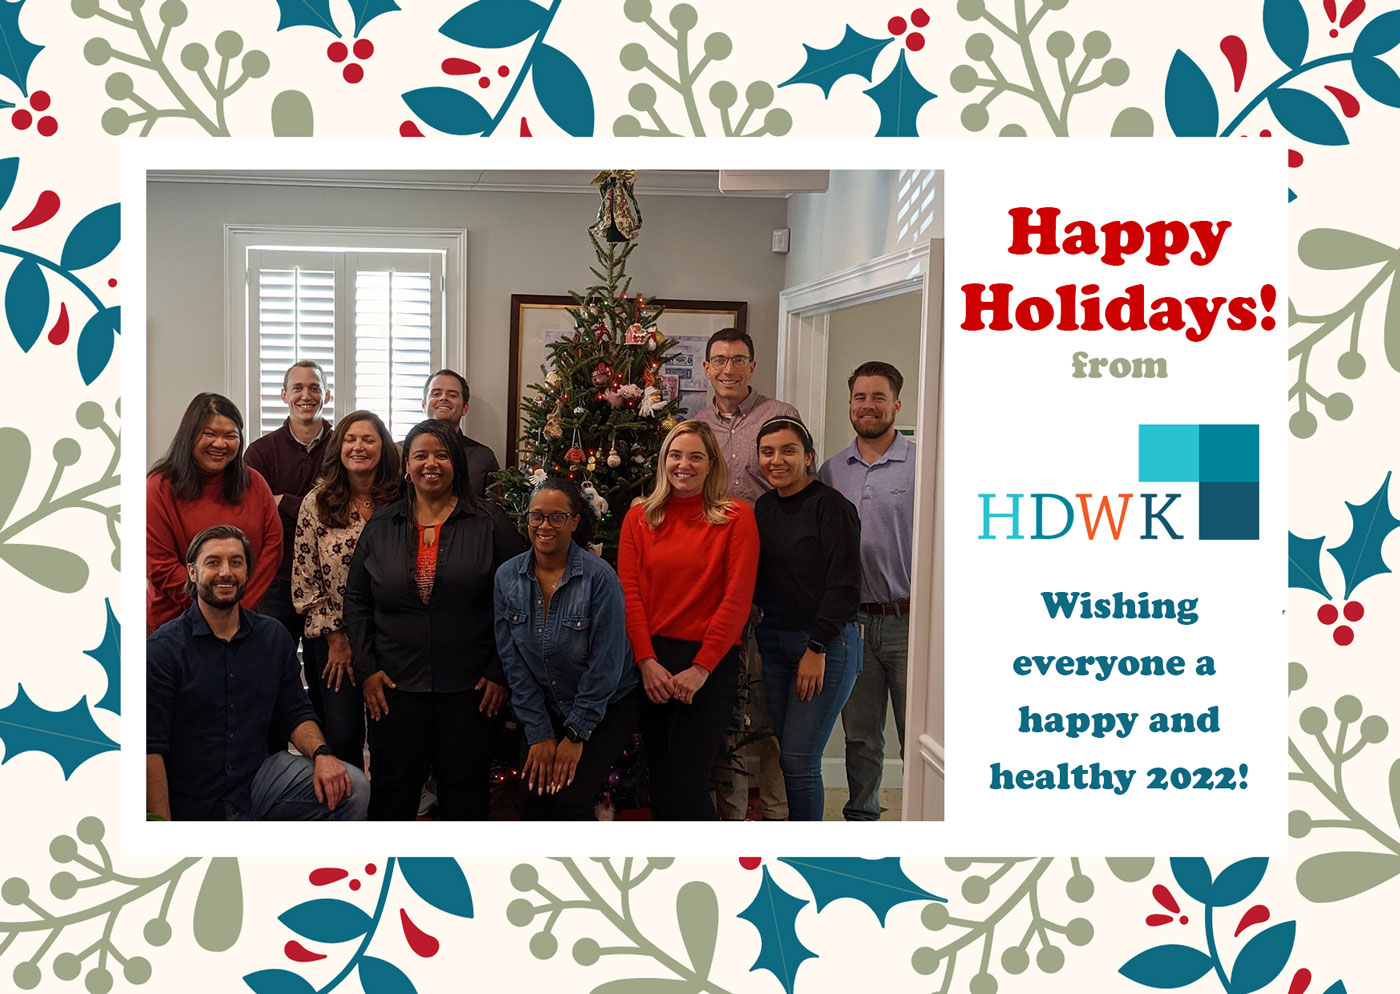 Happy Holidays from HDWK!